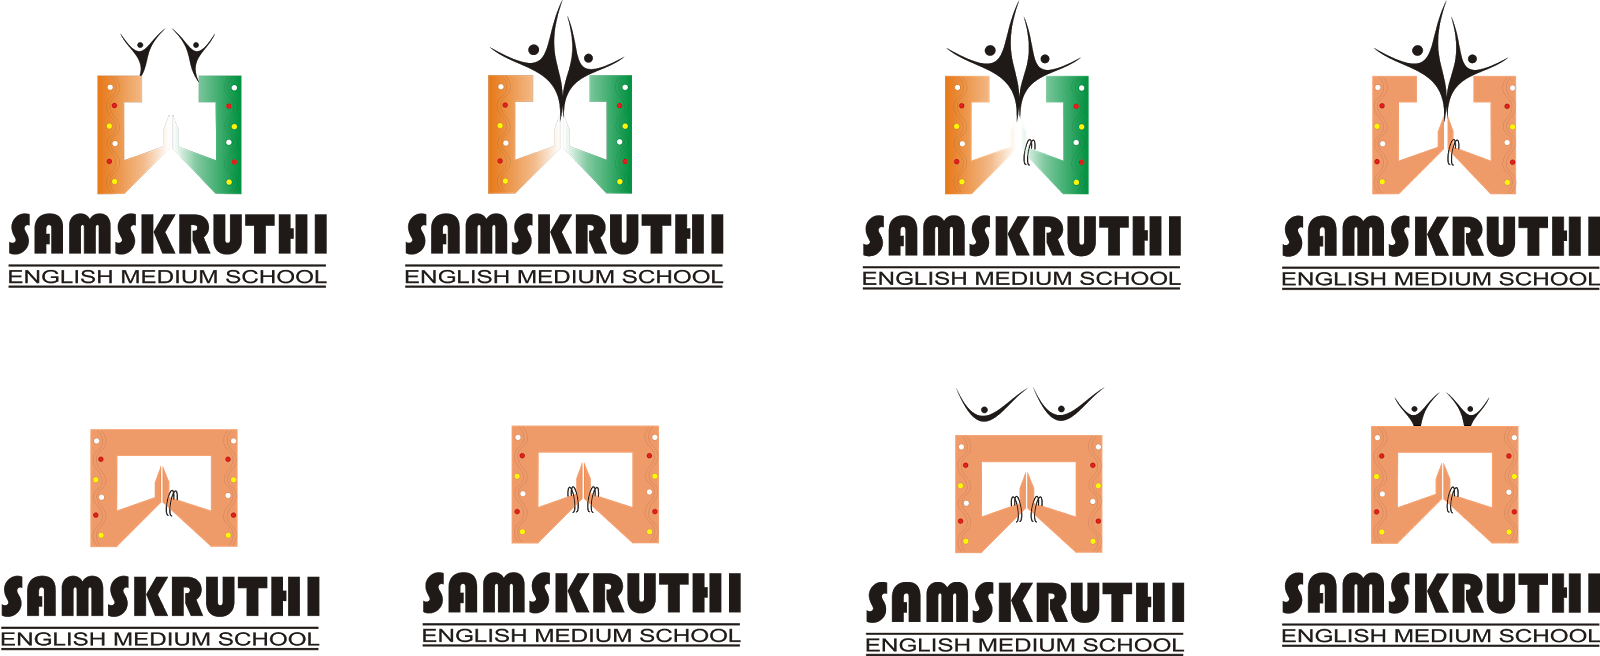 In This Logo Explains About That ”indian Tradition - Graphic Design (1600x656), Png Download